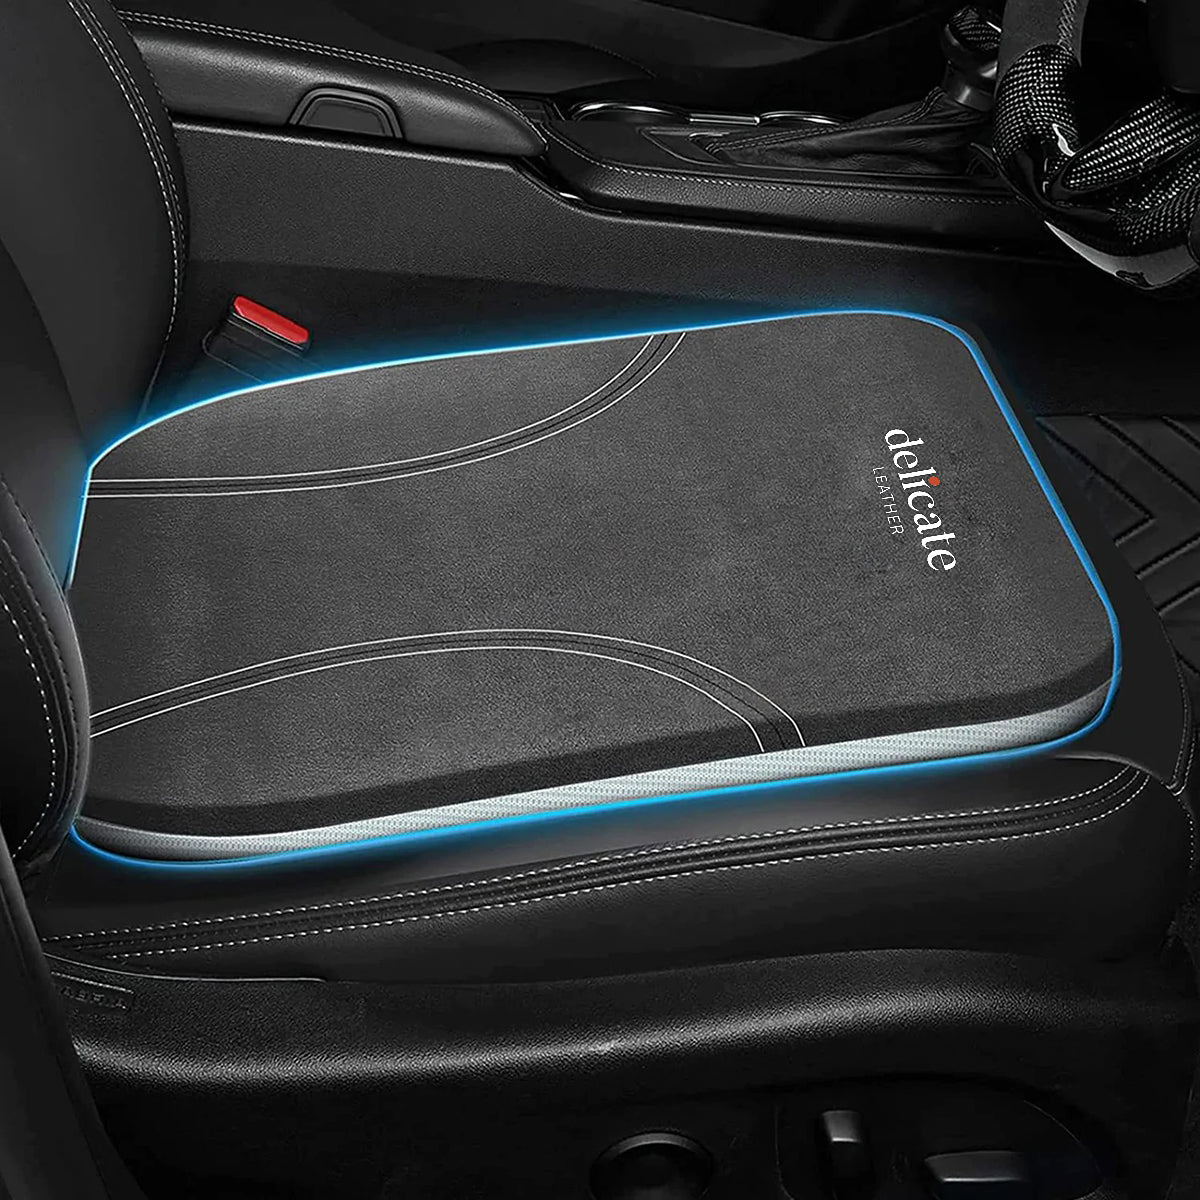 Land Rover Car Seat Cushion: Enhance Comfort and Support for Your Drive